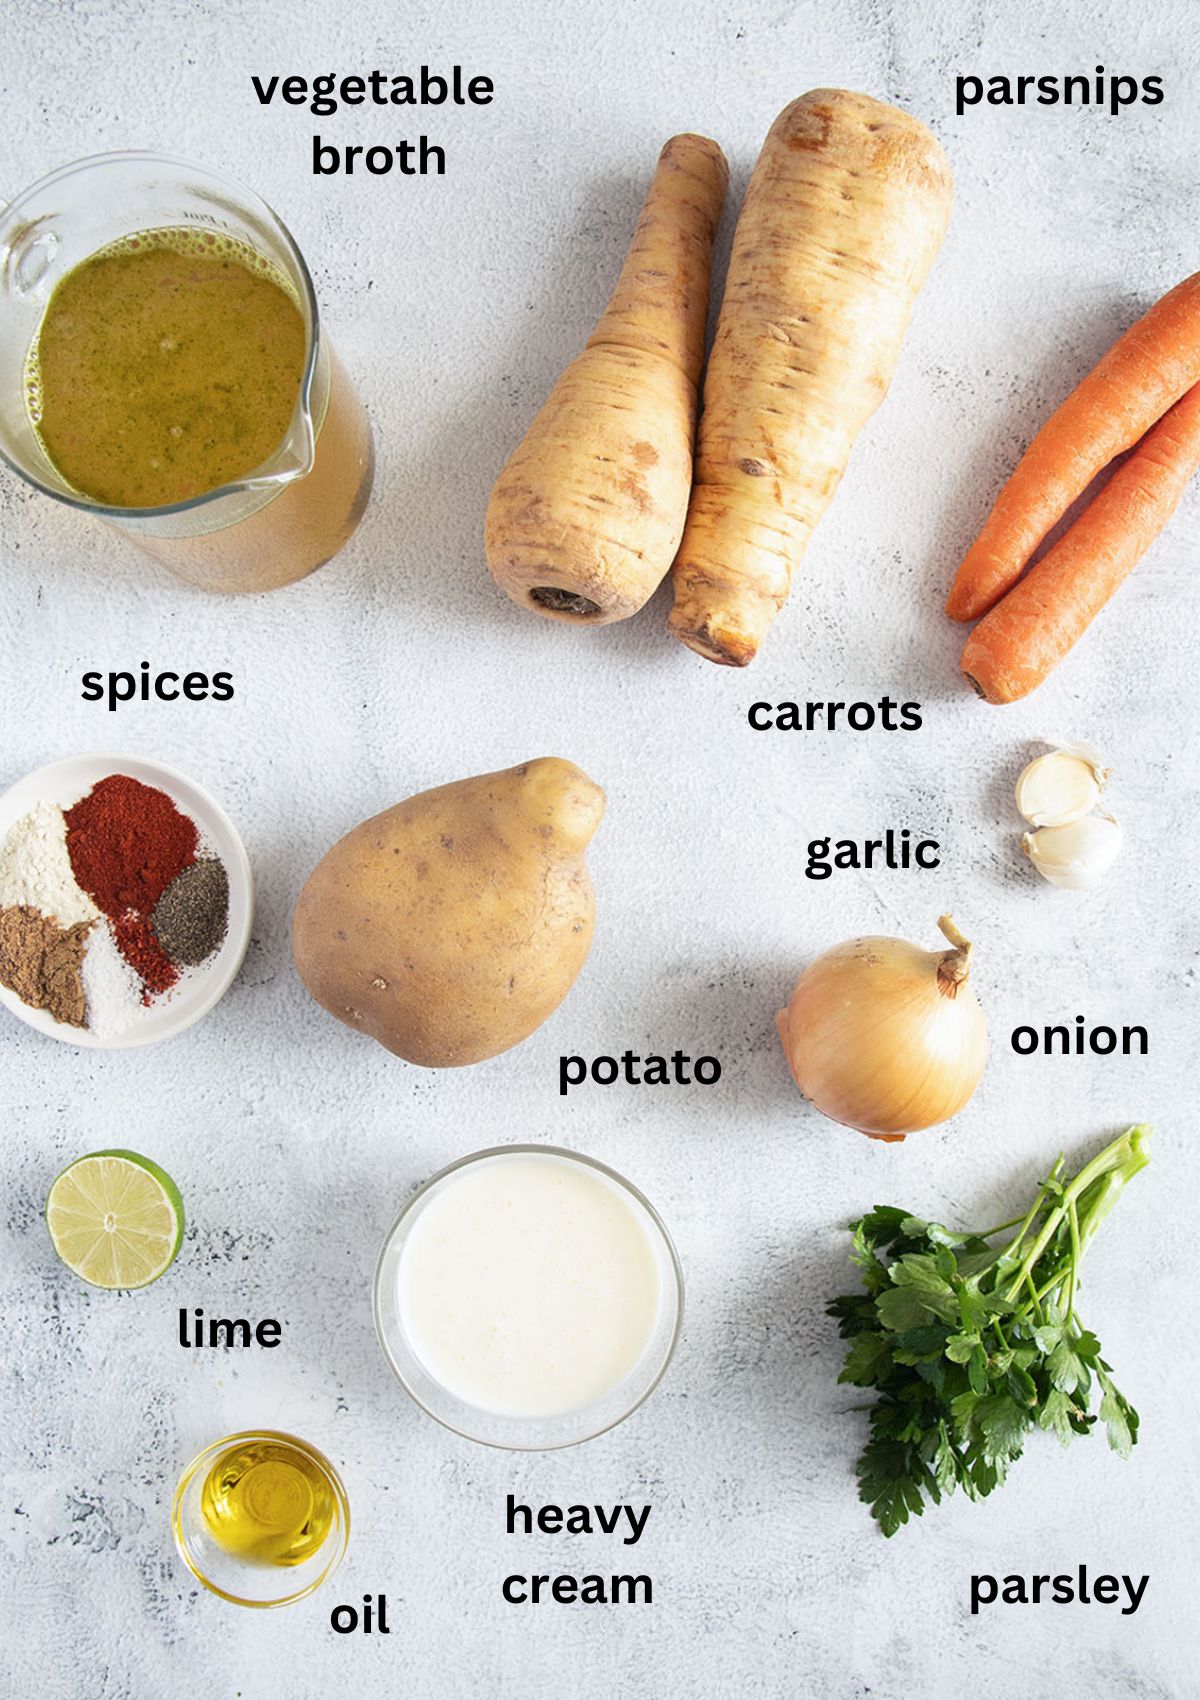 labeled ingredients for making parsnip soup with carrots and potatoes.